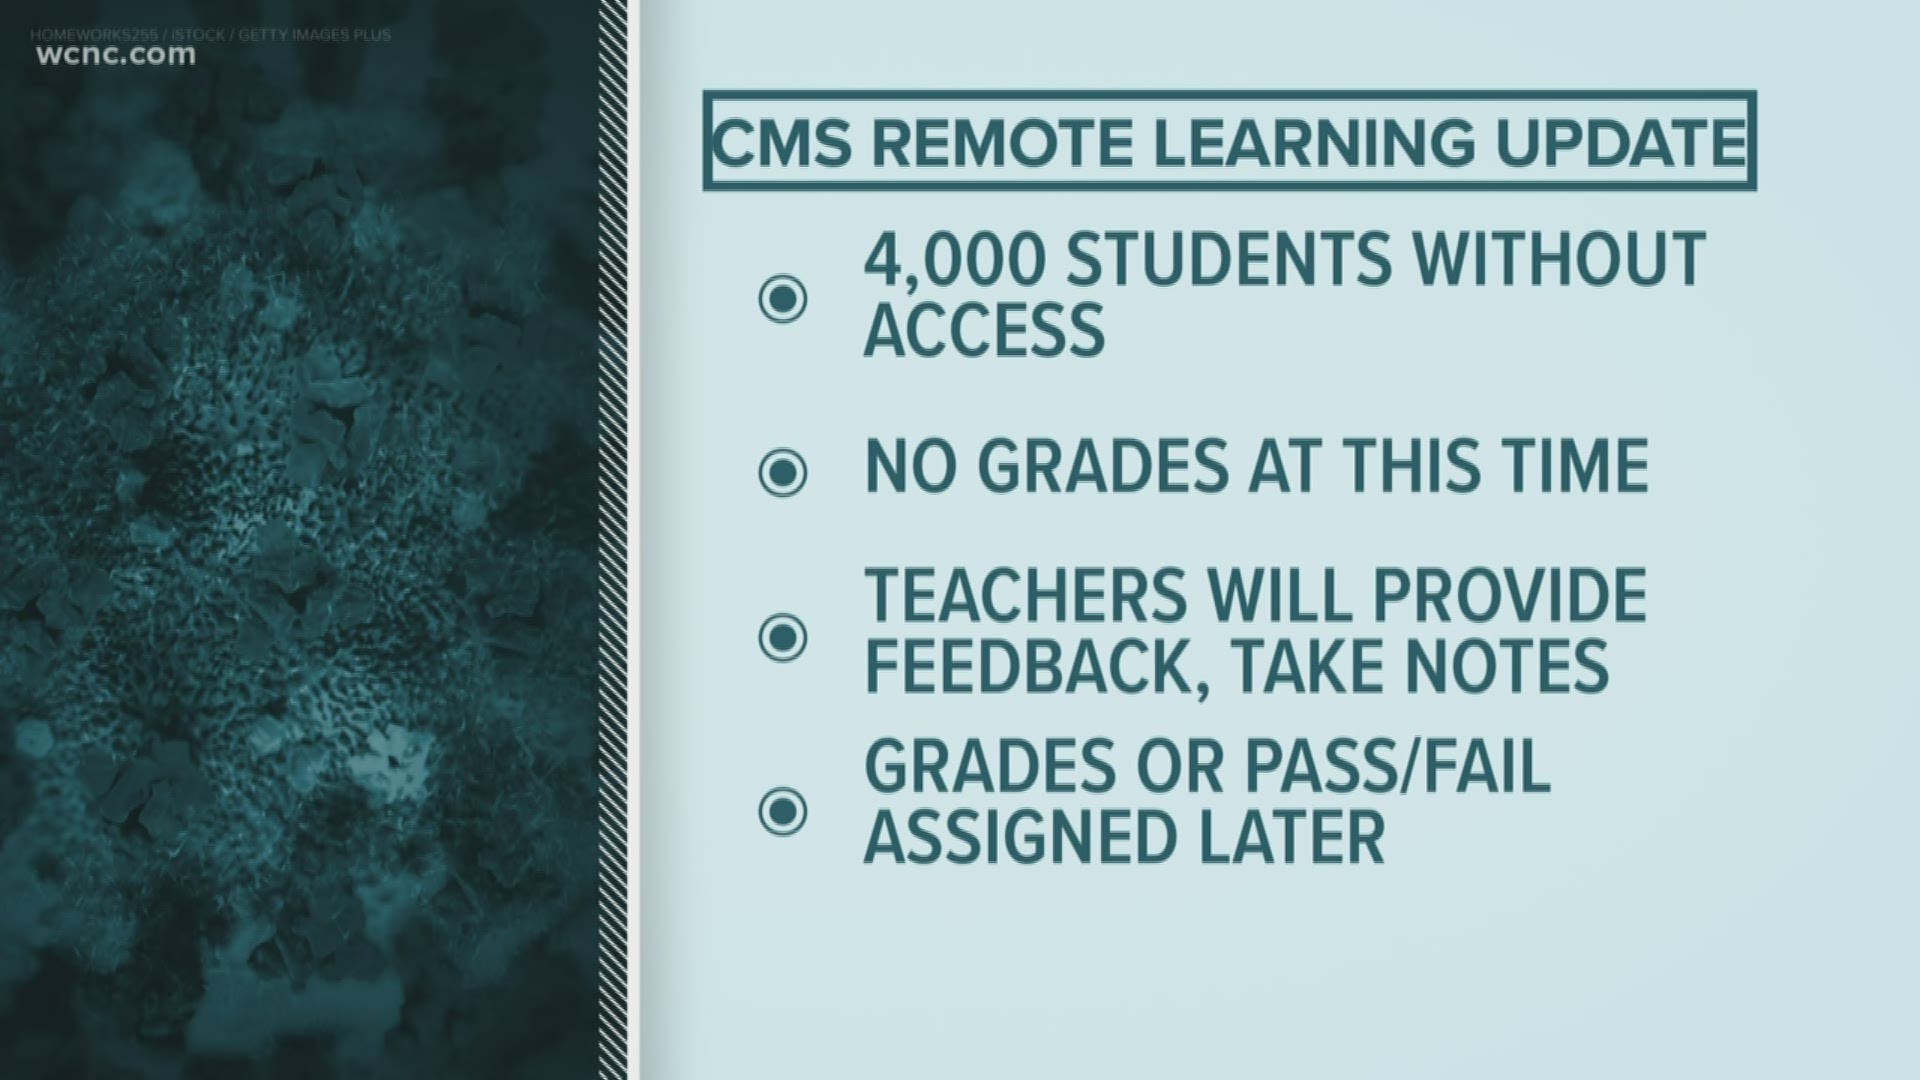 Teachers in the district will be giving feedback, then will later provide grades based on the state's guidance.